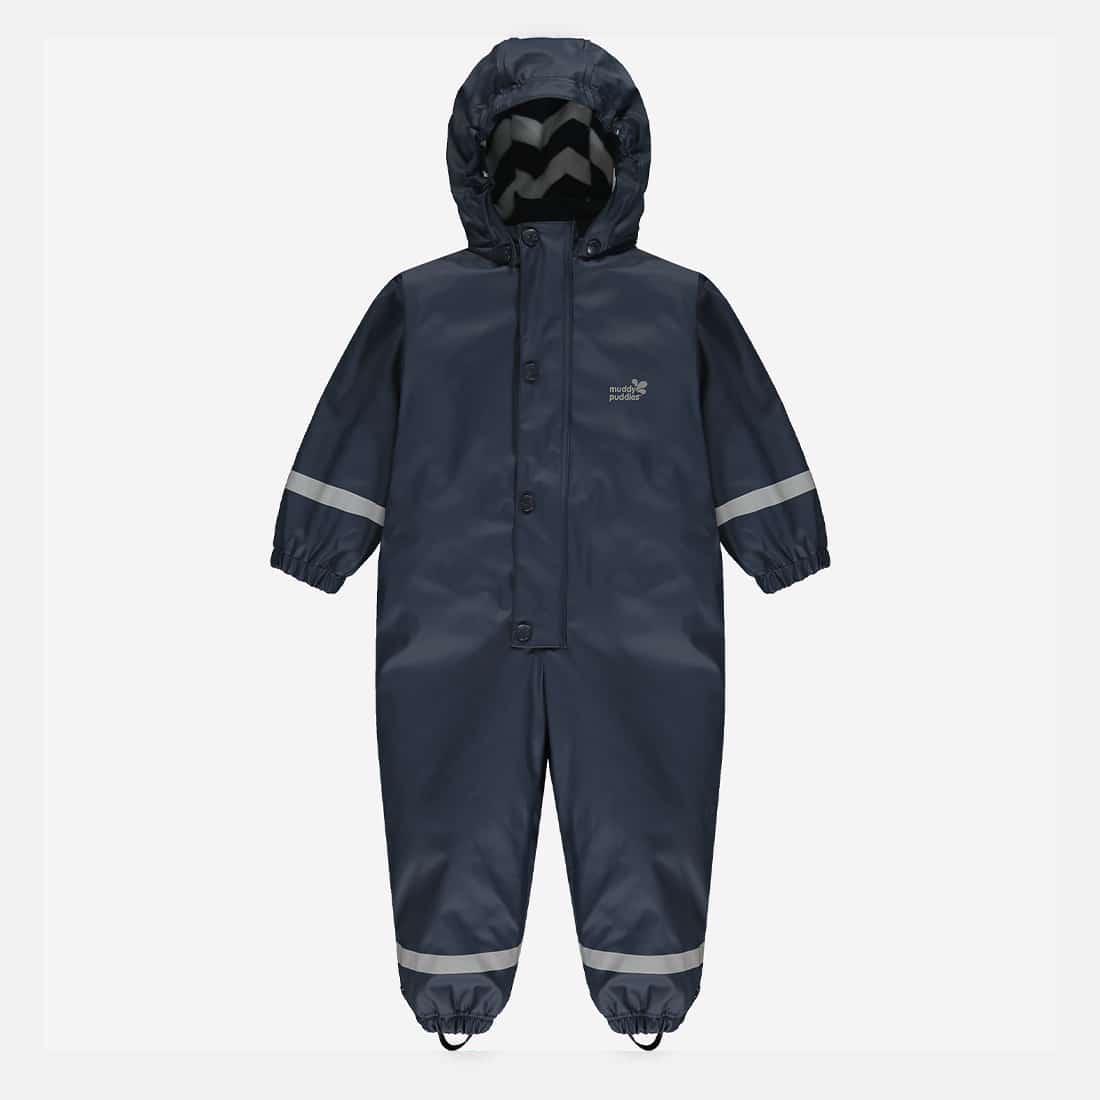 Toddler Fleece Lined Puddle Suit Navy